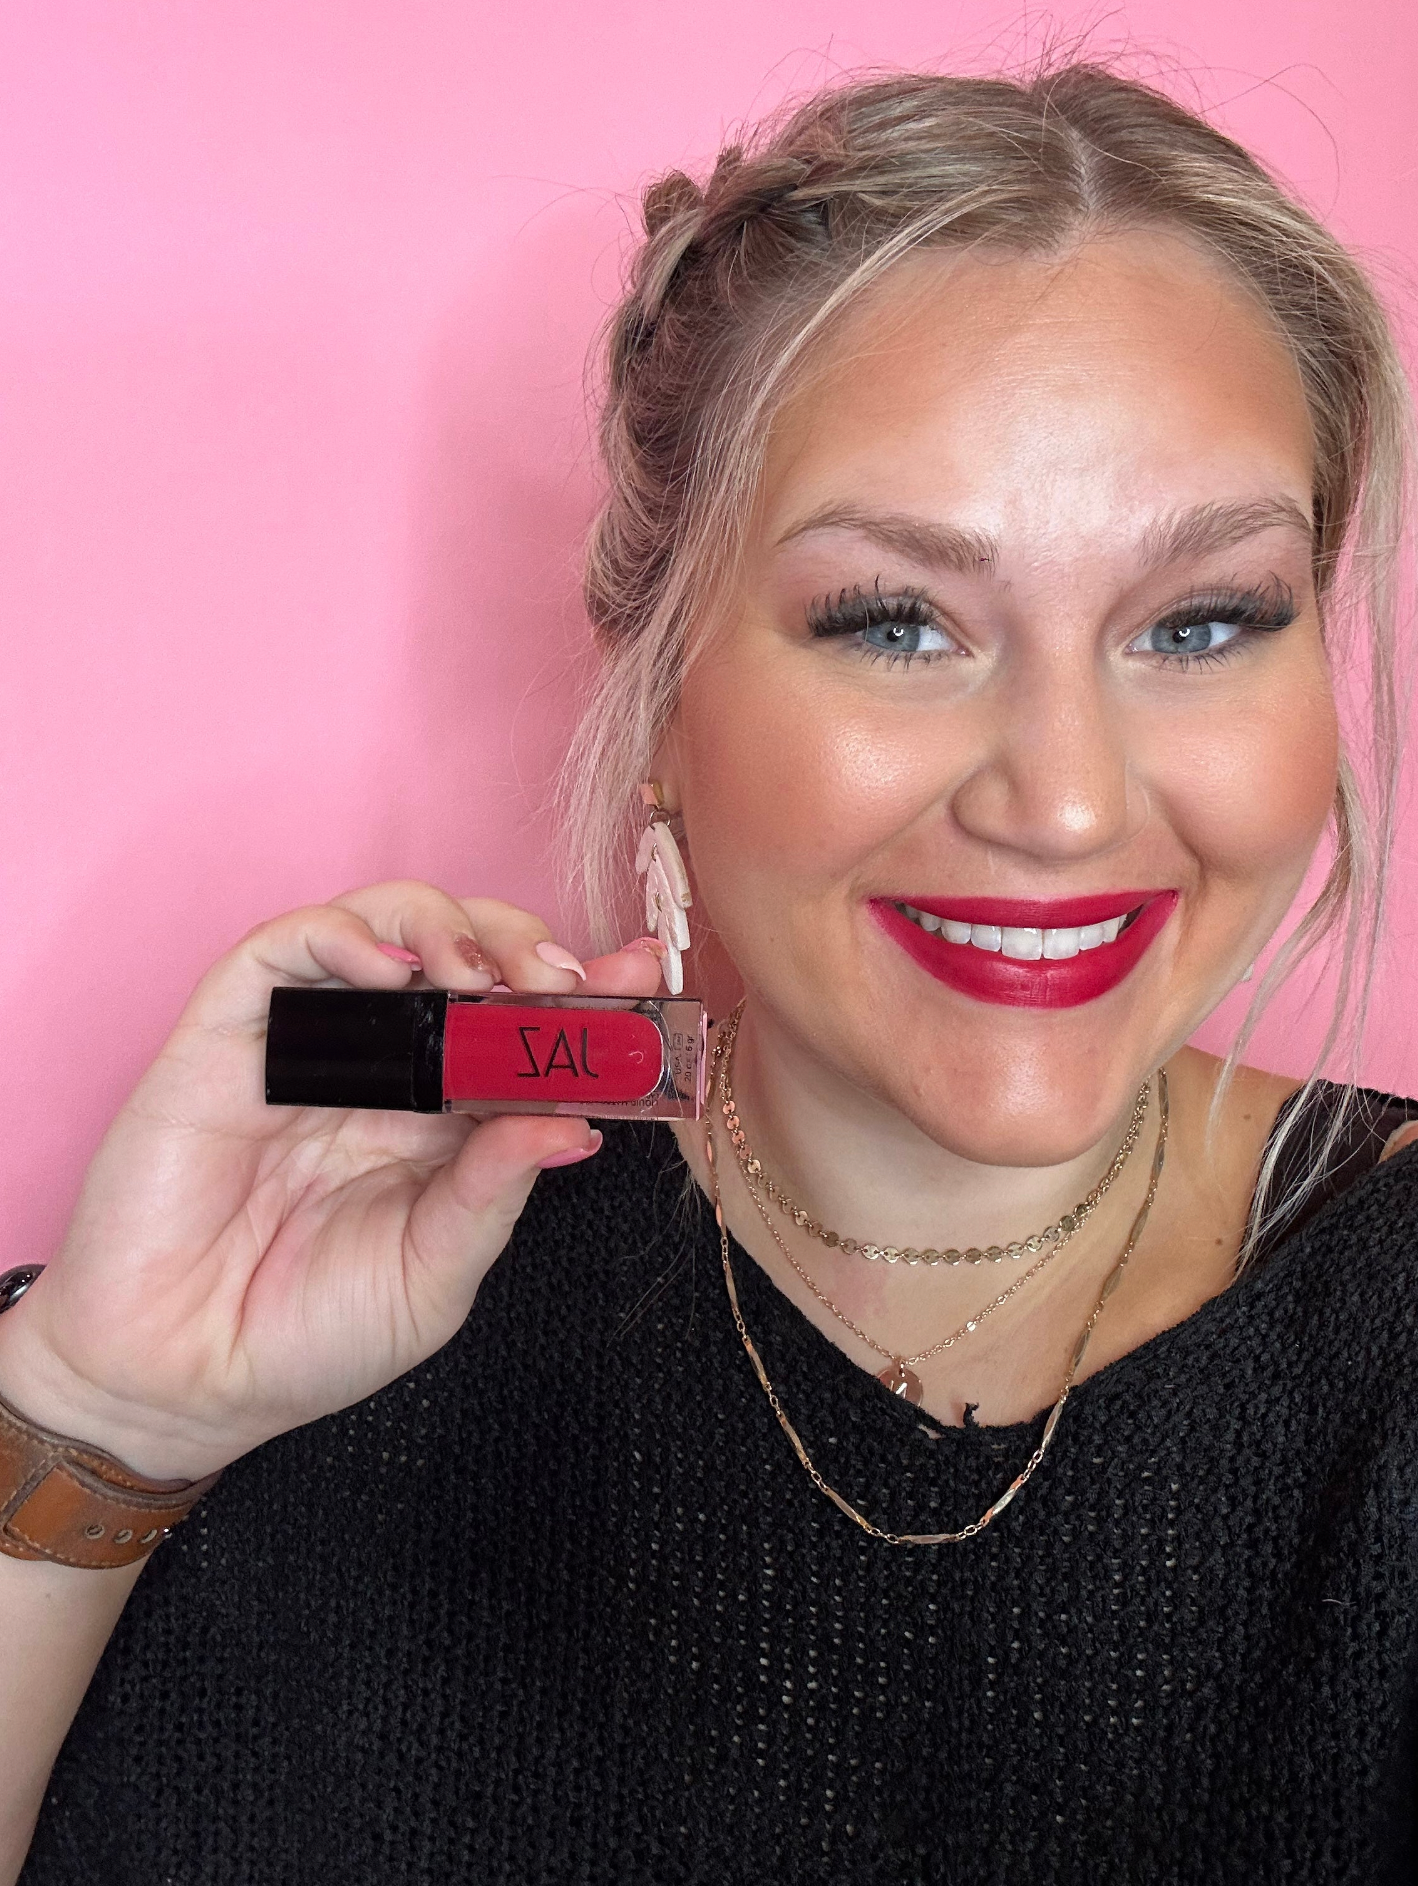 Hollywood Red Liquid Matte Stain